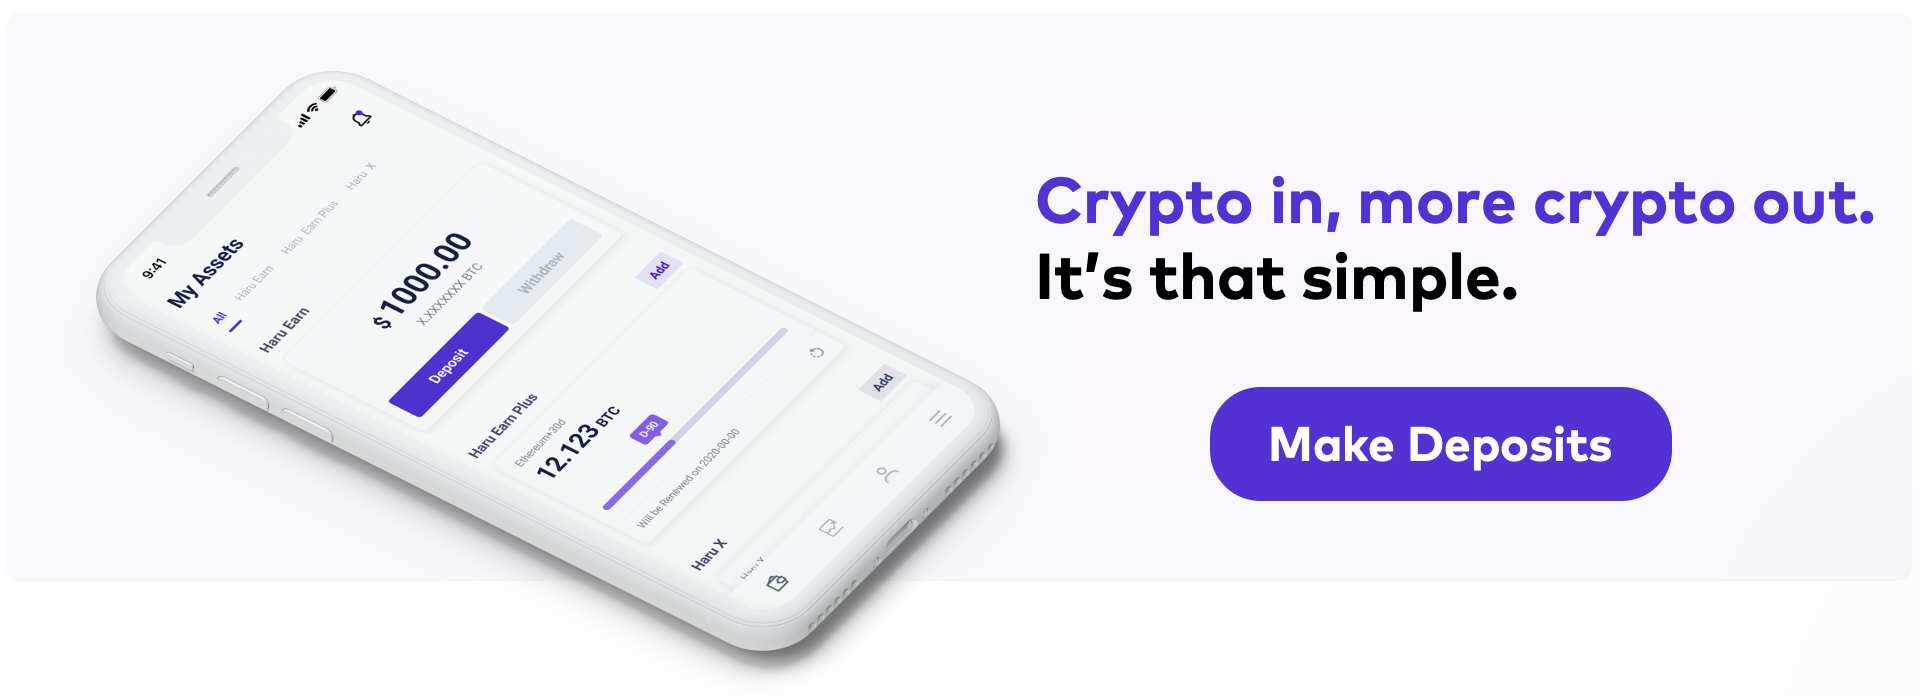 Haru - Keep Your Crypto Asset Smart. Earn up to 16% on BTC, ETH, and USDT. Flexible lockup with daily earnings.